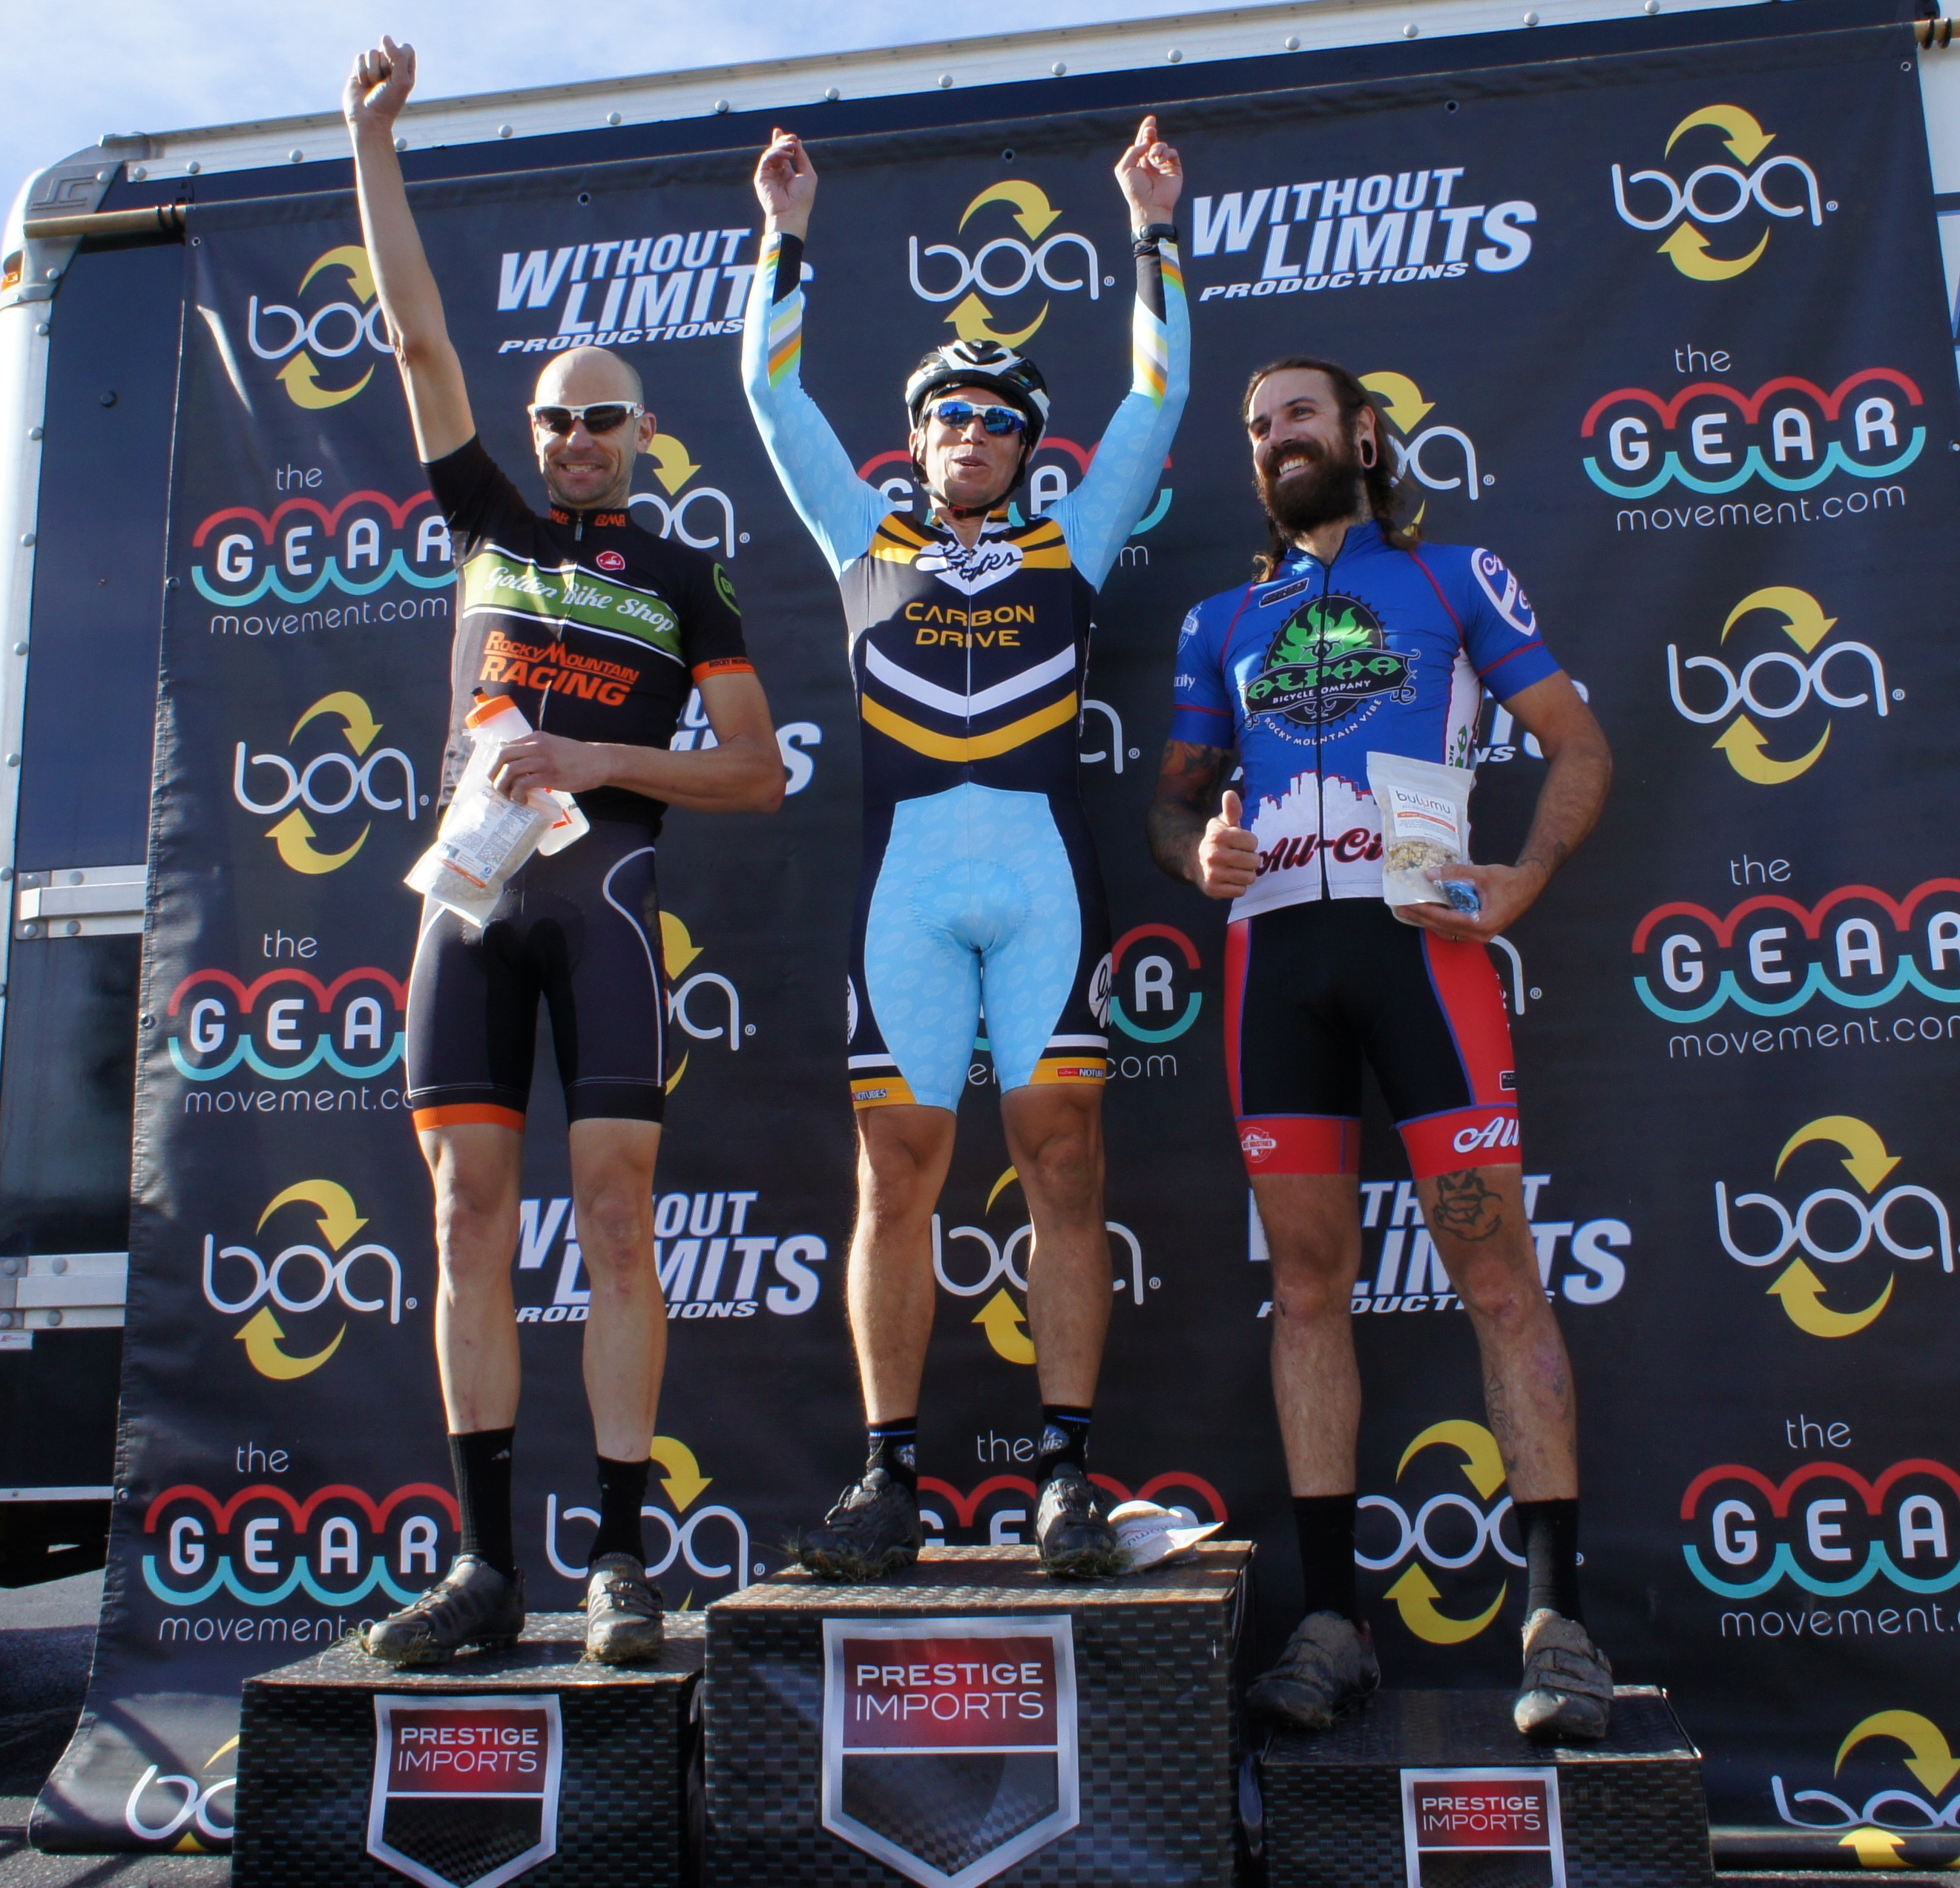 Top step of the podium for Mitch Westall in Broomfield!